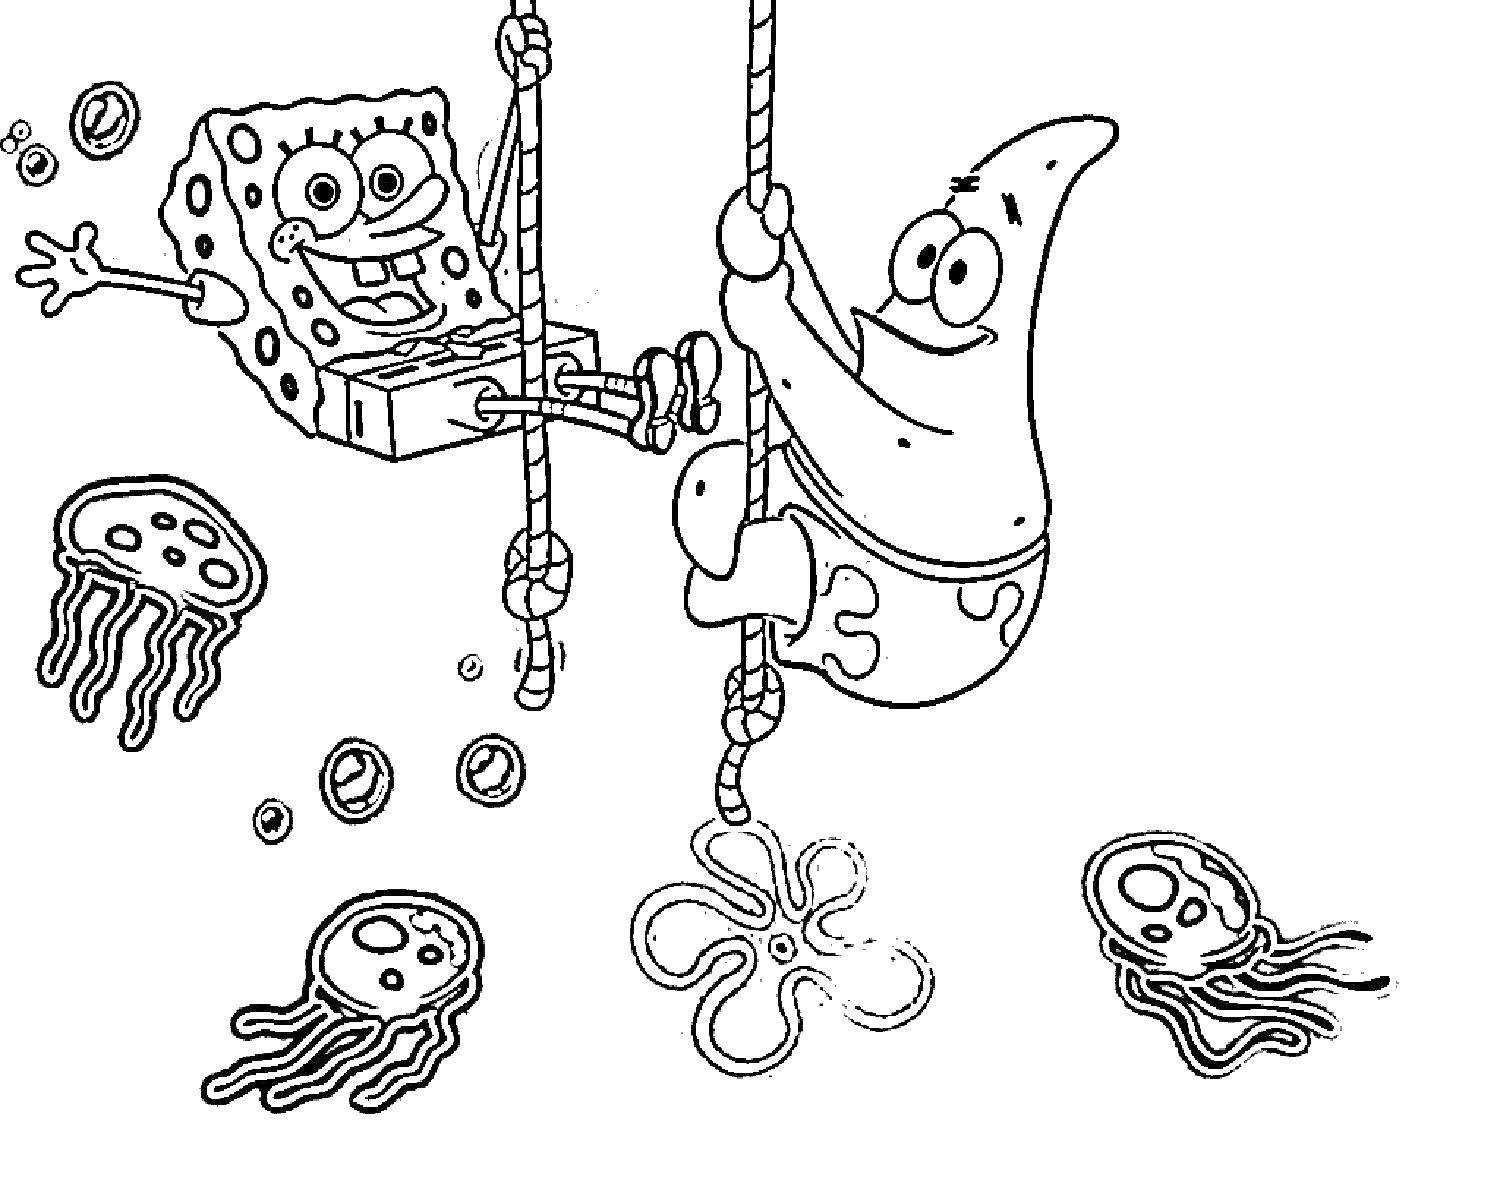 Coloring Spongebob and Patrick on the rope. Category Spongebob. Tags:  the spongebob, Patrick.